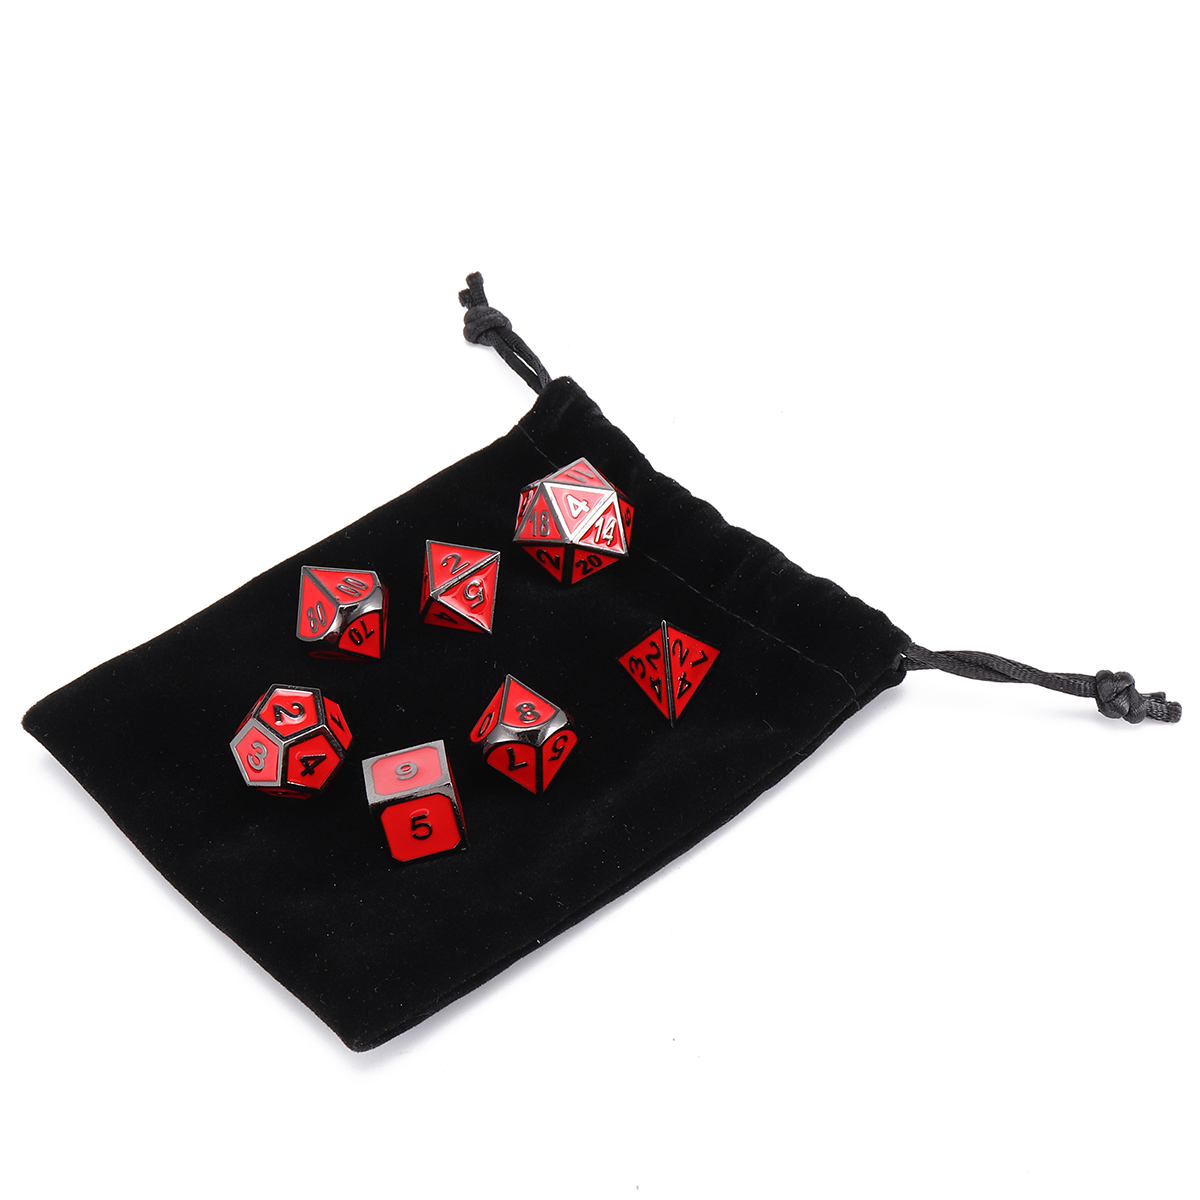 7-Pcs-Multisided-Dice-Heavy-Metal-Polyhedral-Dice-Set-Role-Playing-Games-Dices-with-Bag-1263009-6